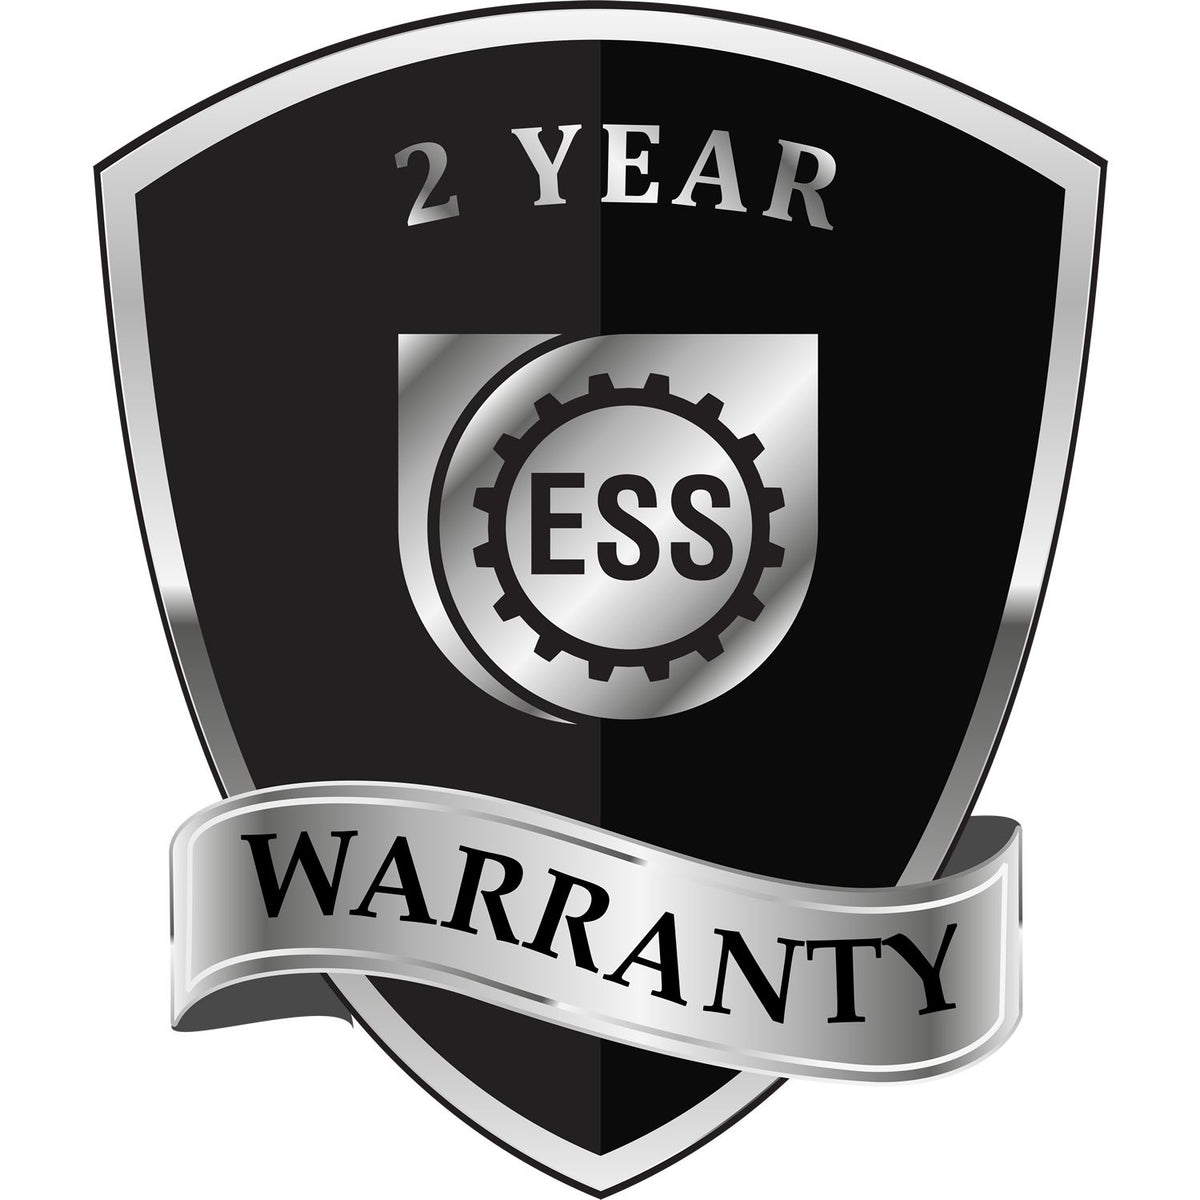 A badge or emblem showing a warranty icon for the Soft Kentucky Professional Engineer Seal